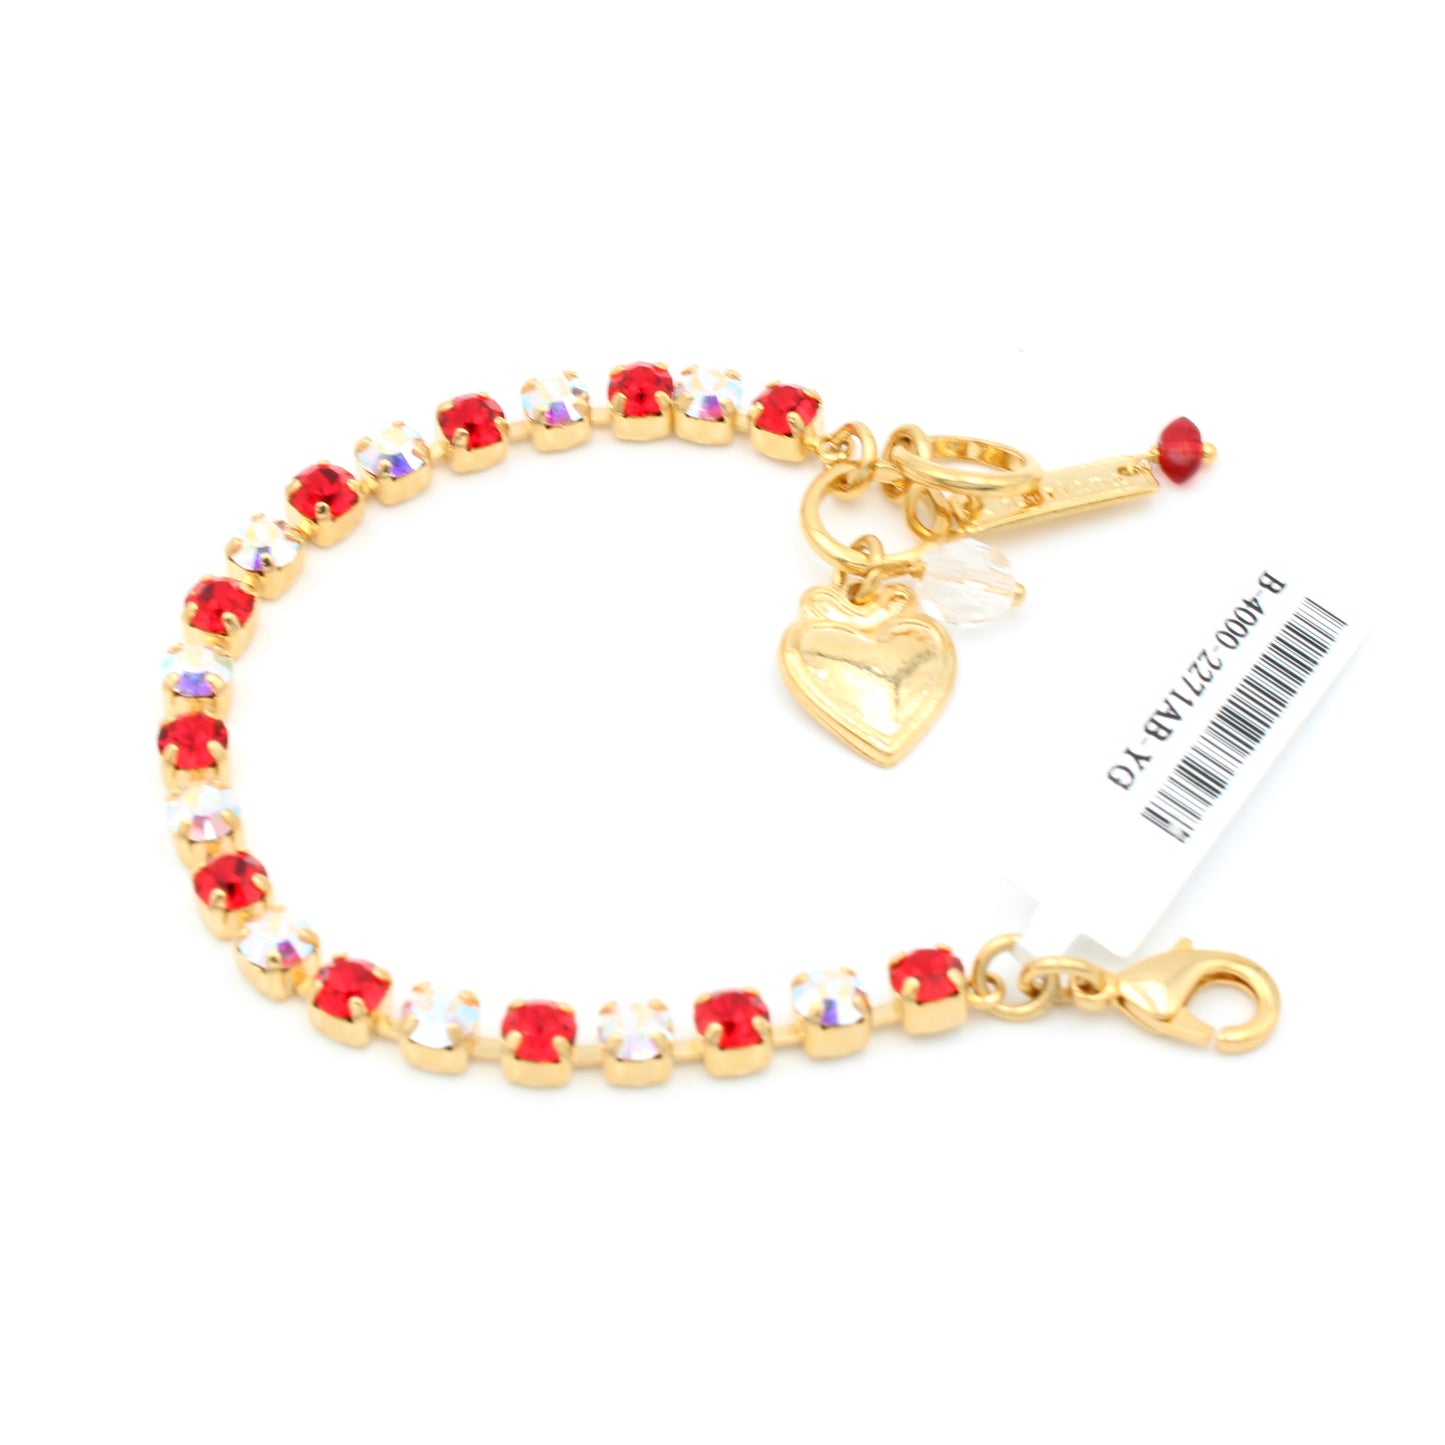 Light Siam and Crystal AB Petite Everyday Bracelet in Yellow Gold